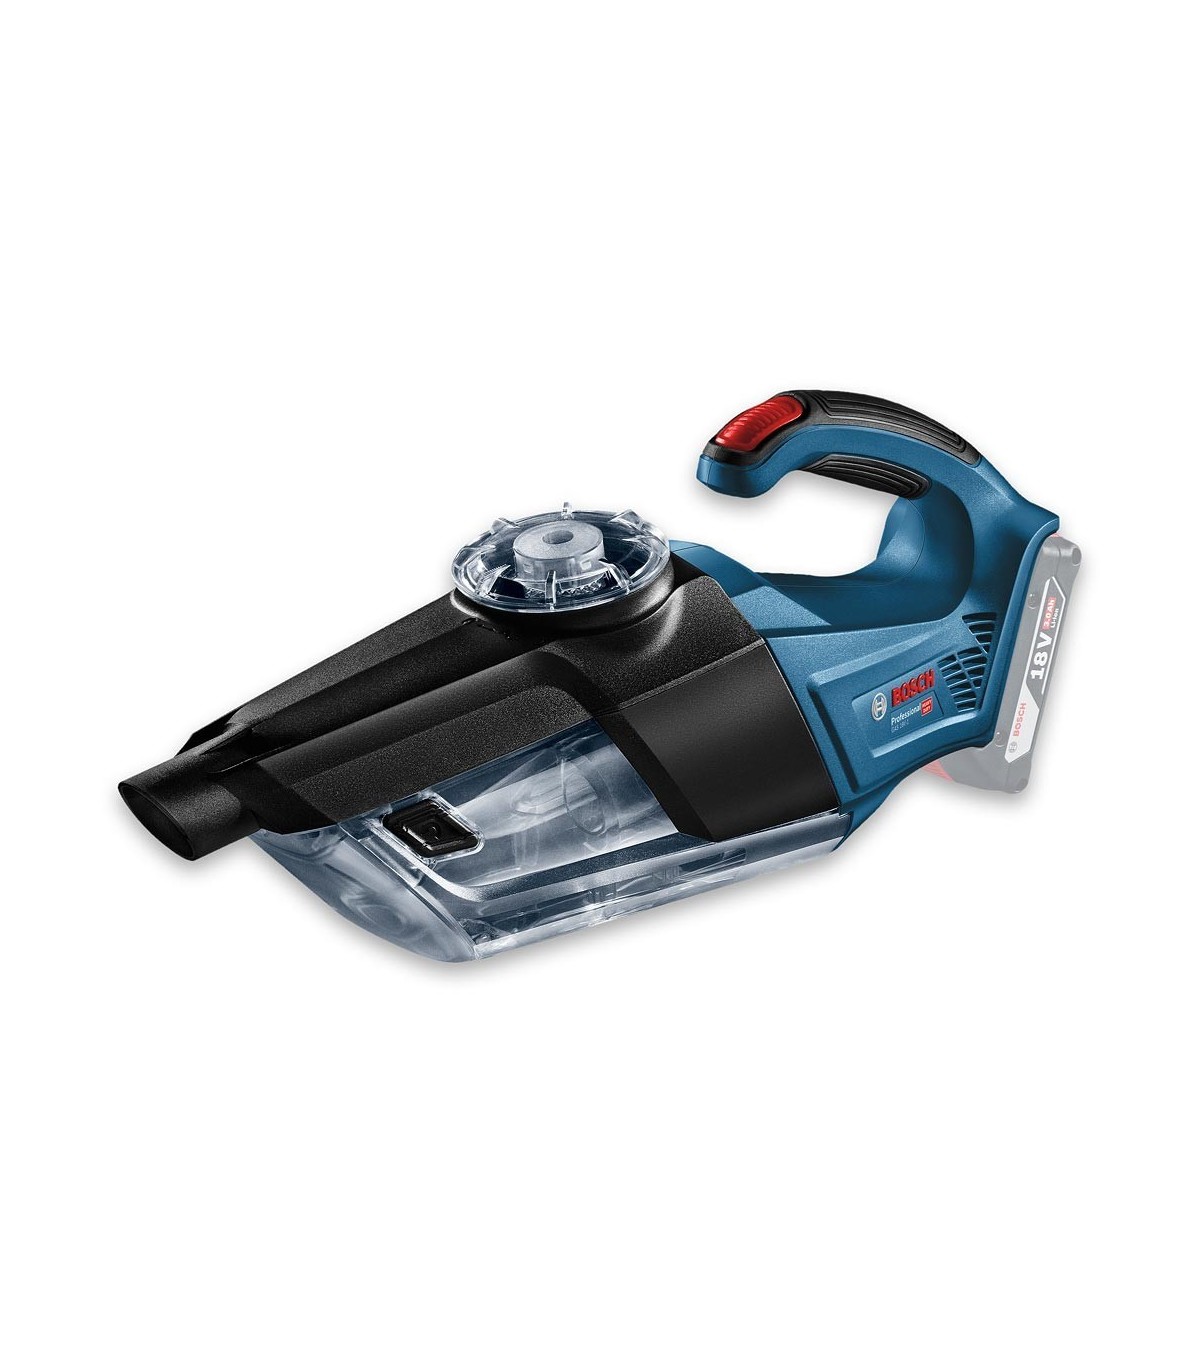 bosch-professional-gas-18-v-1-cordless-vacuum-cleaner-bare-unit